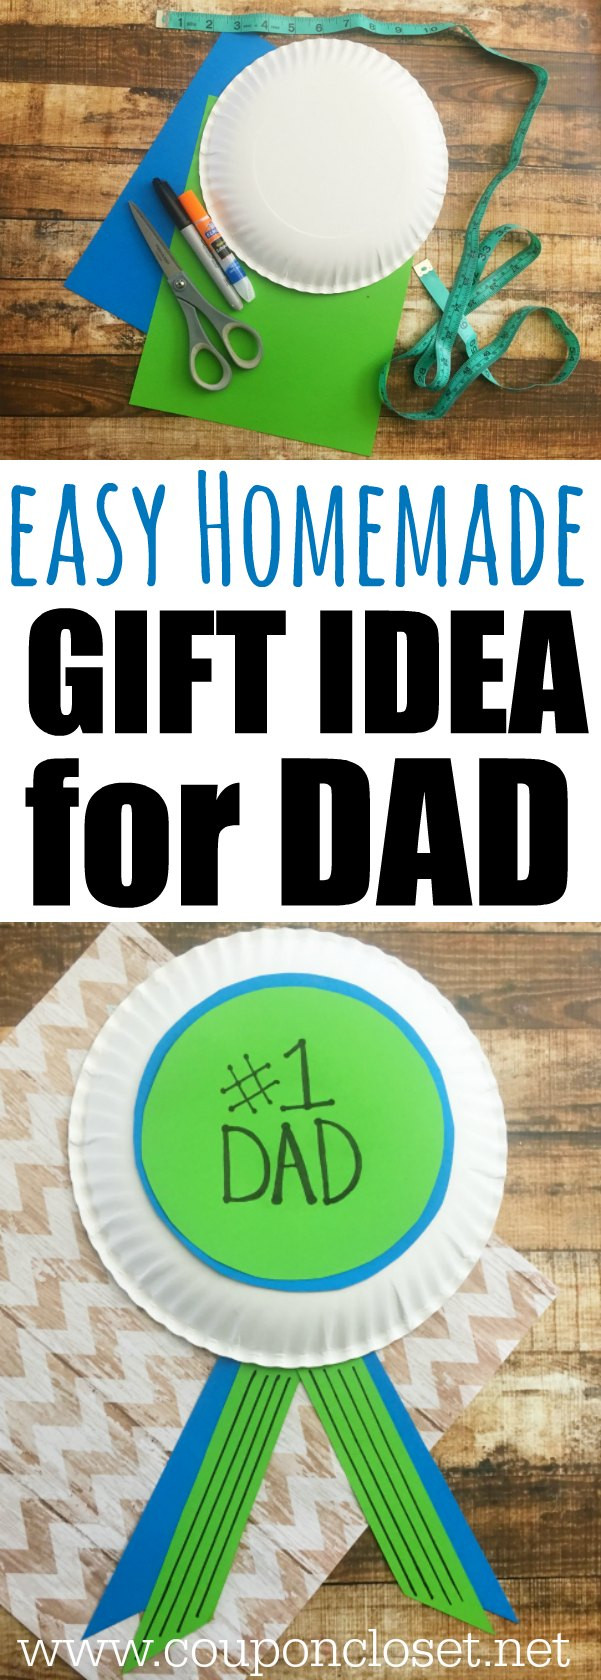 Father'S Day Gifts From Kids
 Homemade Father s Day Gift Idea 1 Dad Award e Crazy Mom